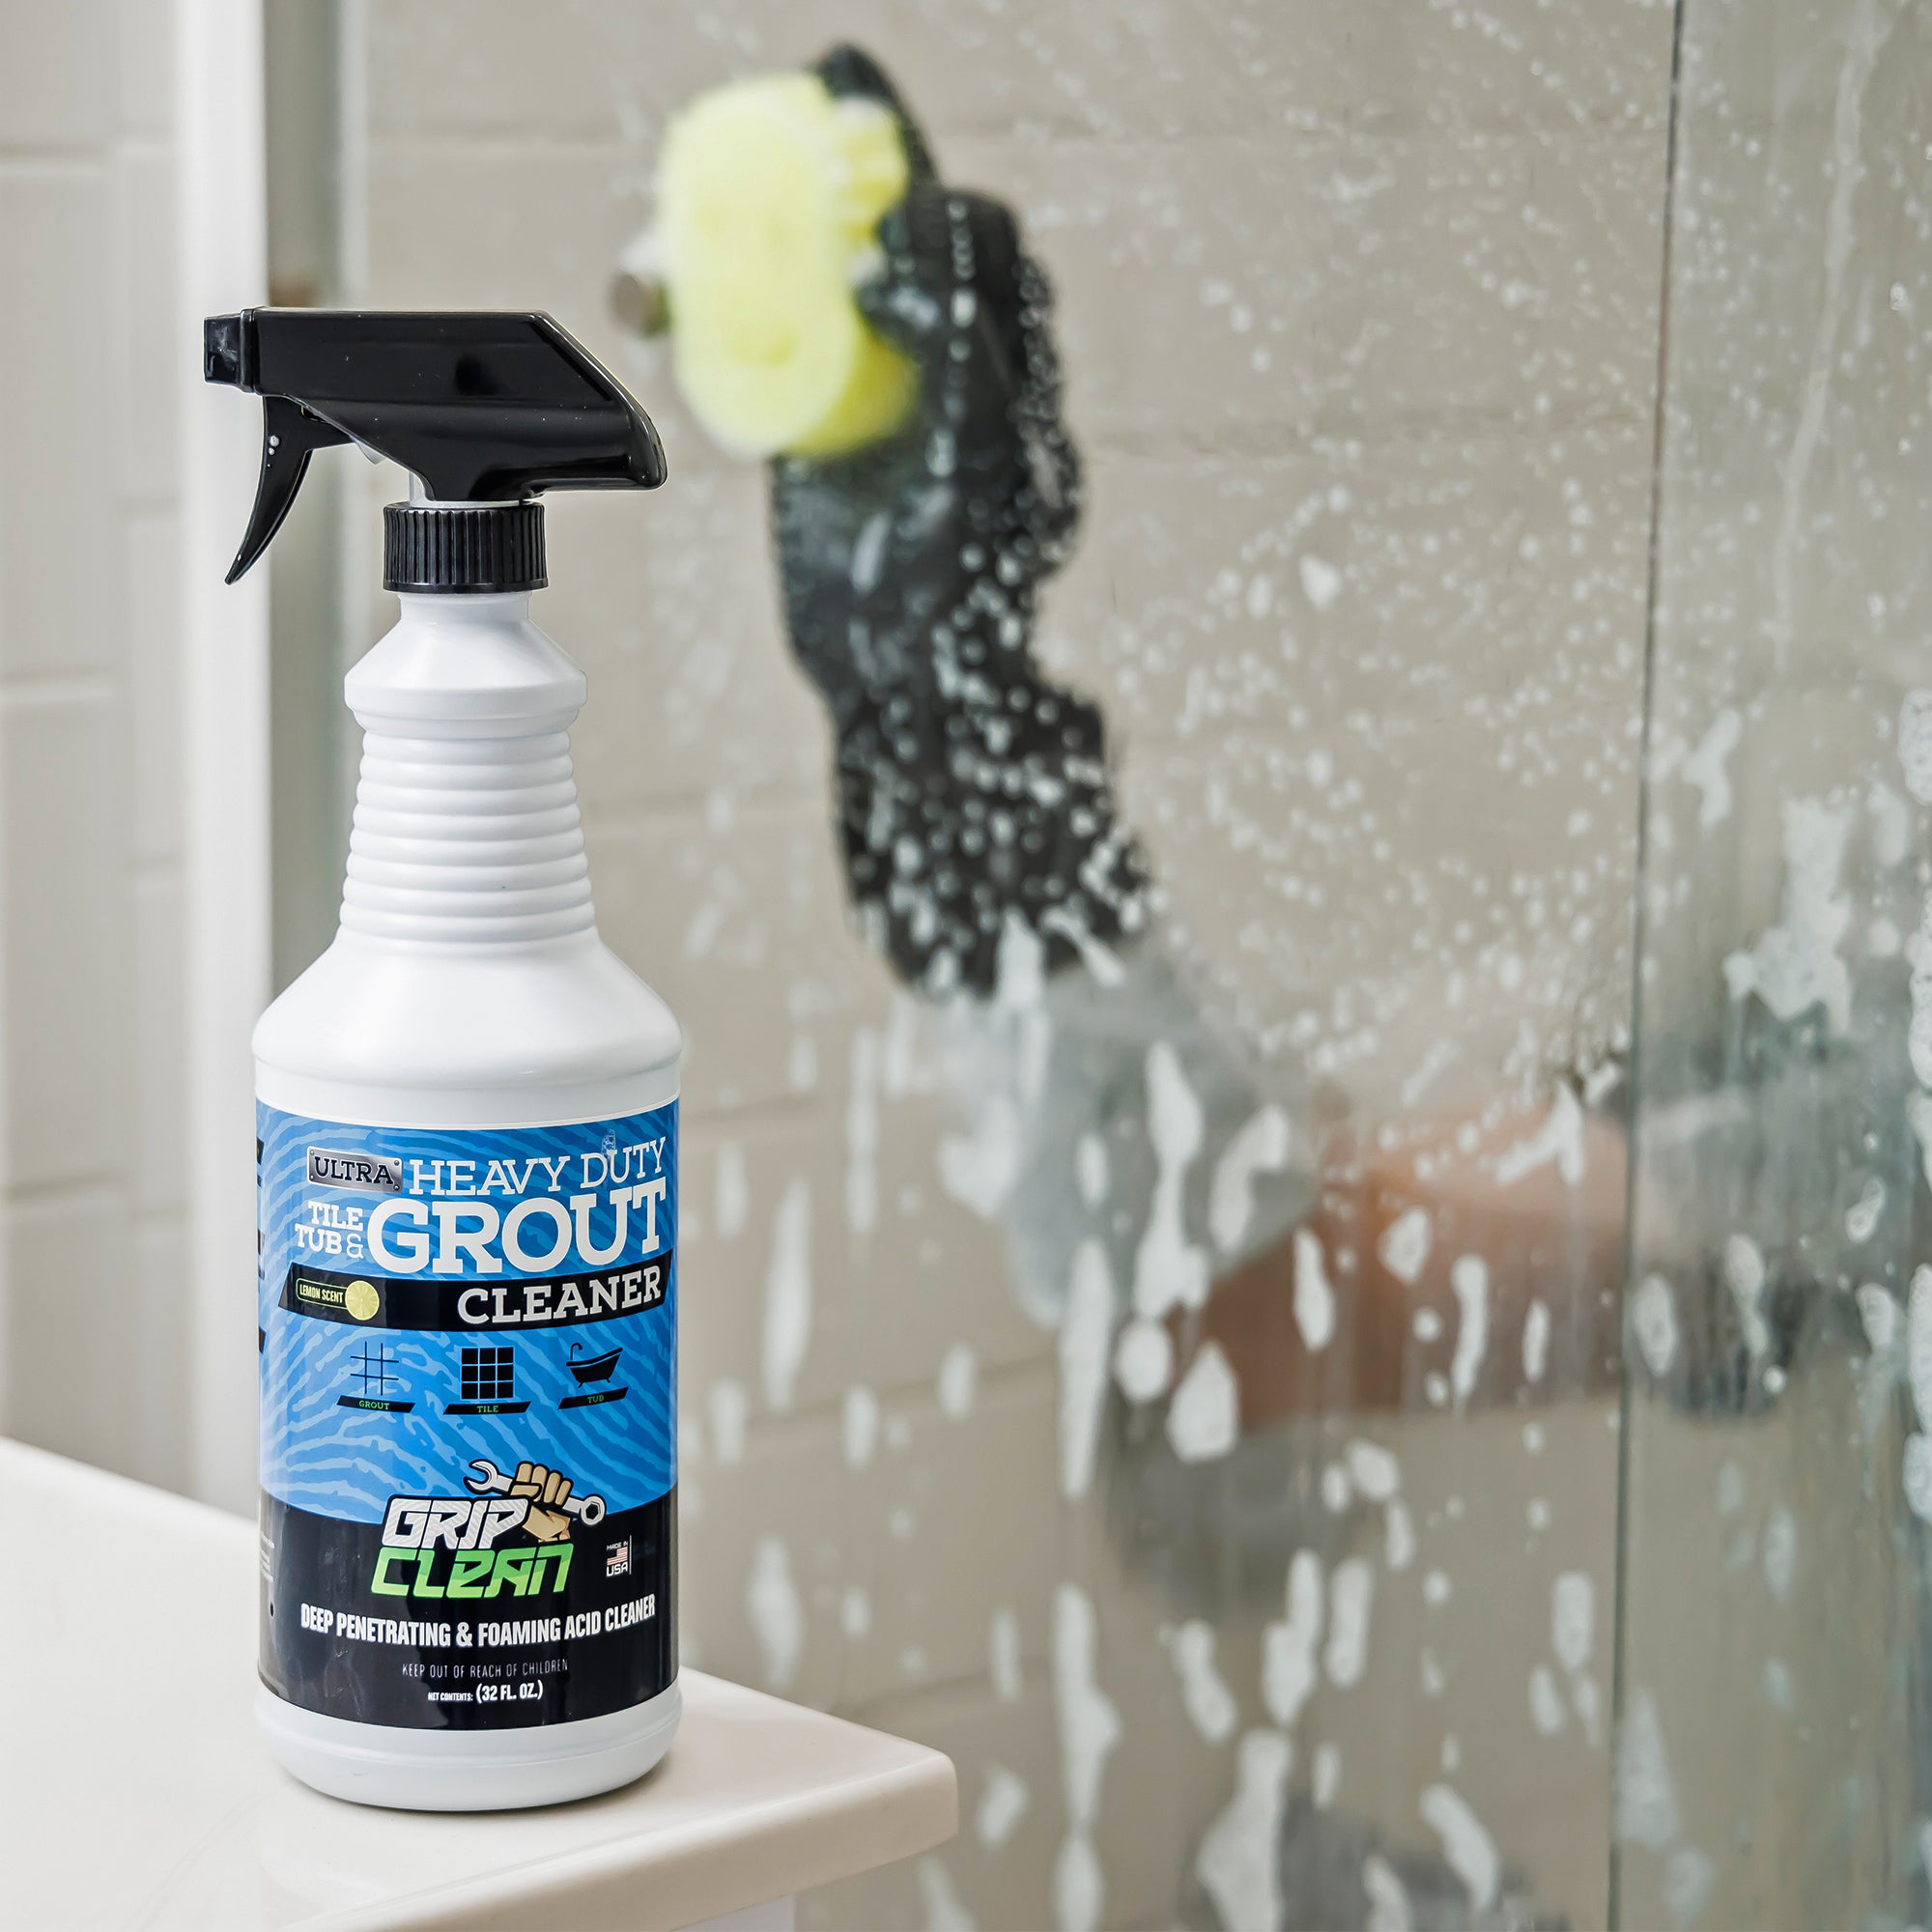 Ultimate Grout Cleaner Spray for Tile - Heavy Duty Grout and Tile Cleaner  for Tile Floors & Shower Grout Cleaner - Tile Floor Cleaner Removes Dirt